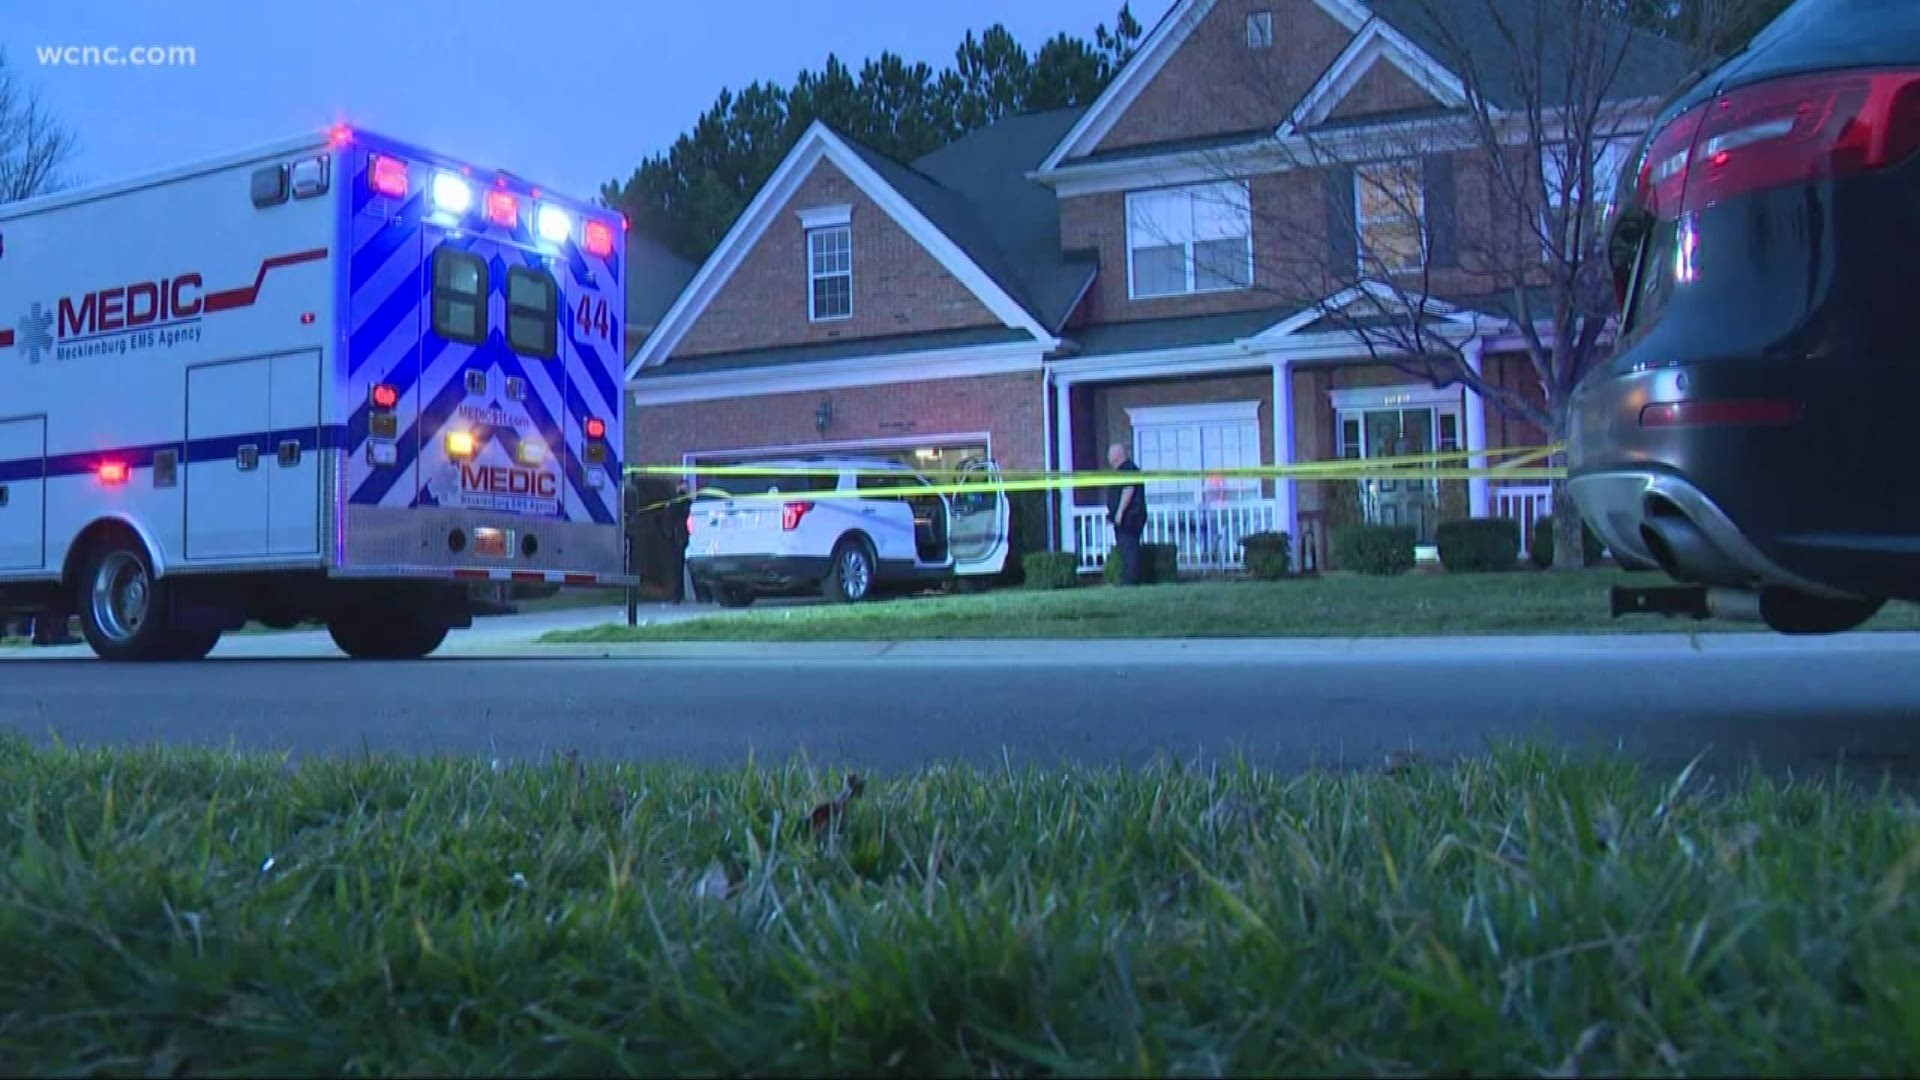 A teenager was taken to the hospital after he was shot during an attempted carjacking in Ballantyne Tuesday morning, police said.